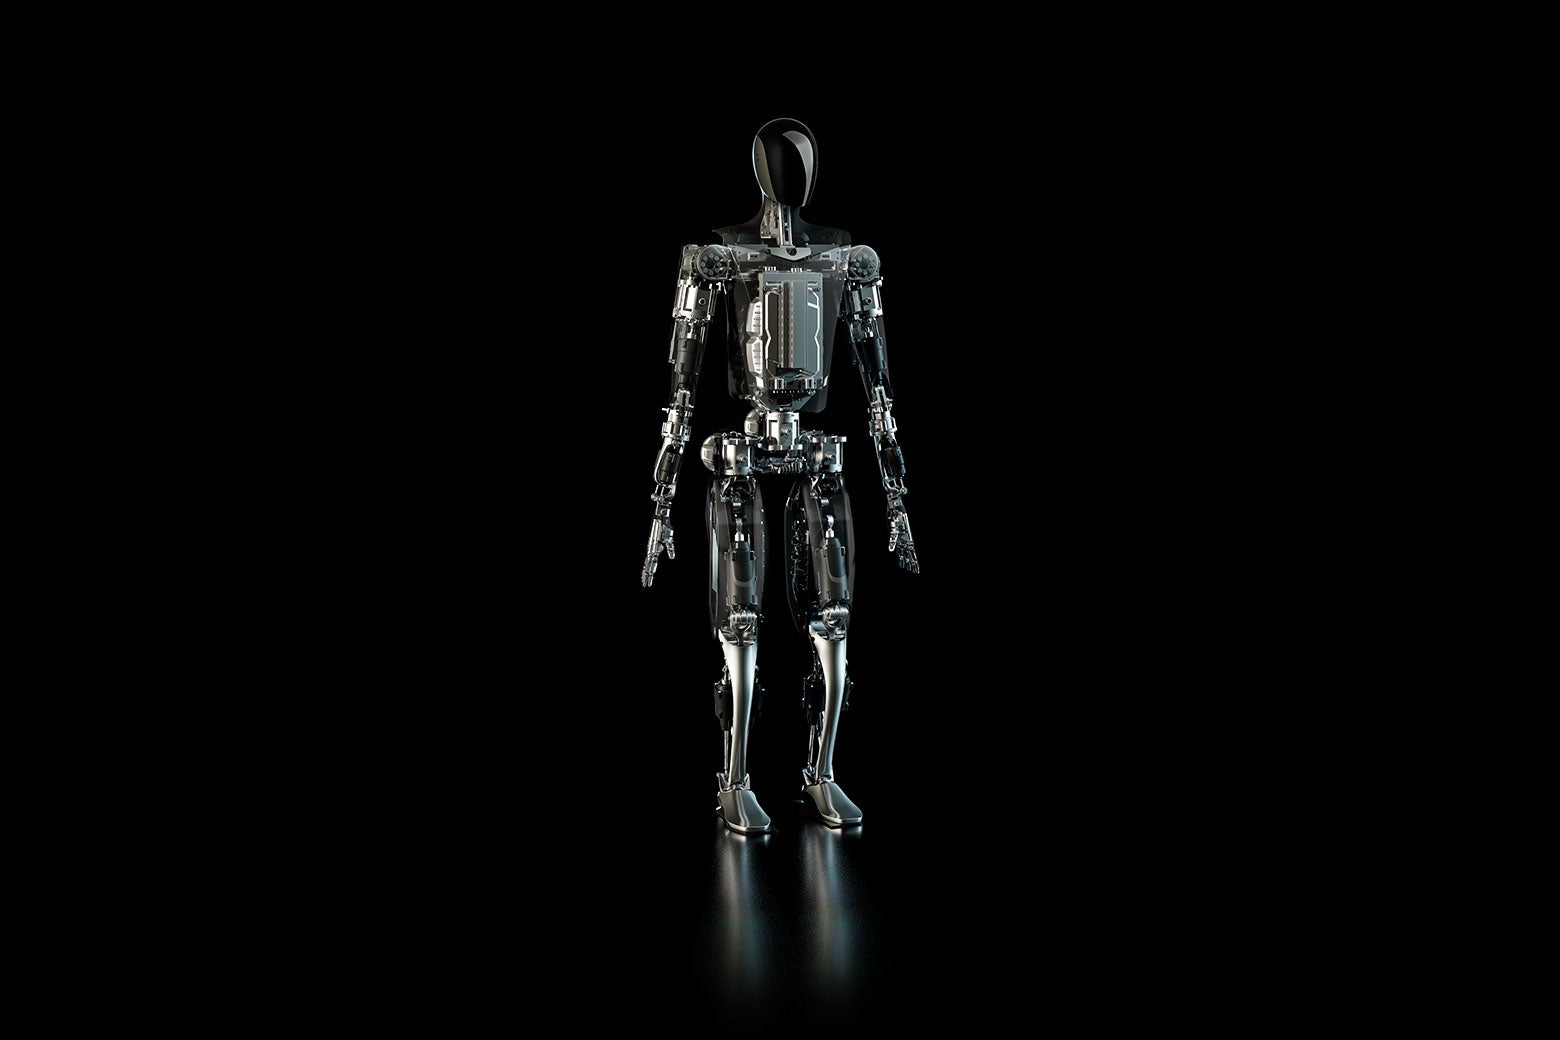 Tesla's Optimus robot against a black background. The robot is tall and muscular, with a smooth, faceless black head. The rest of its body is made up of stainless steel parts.